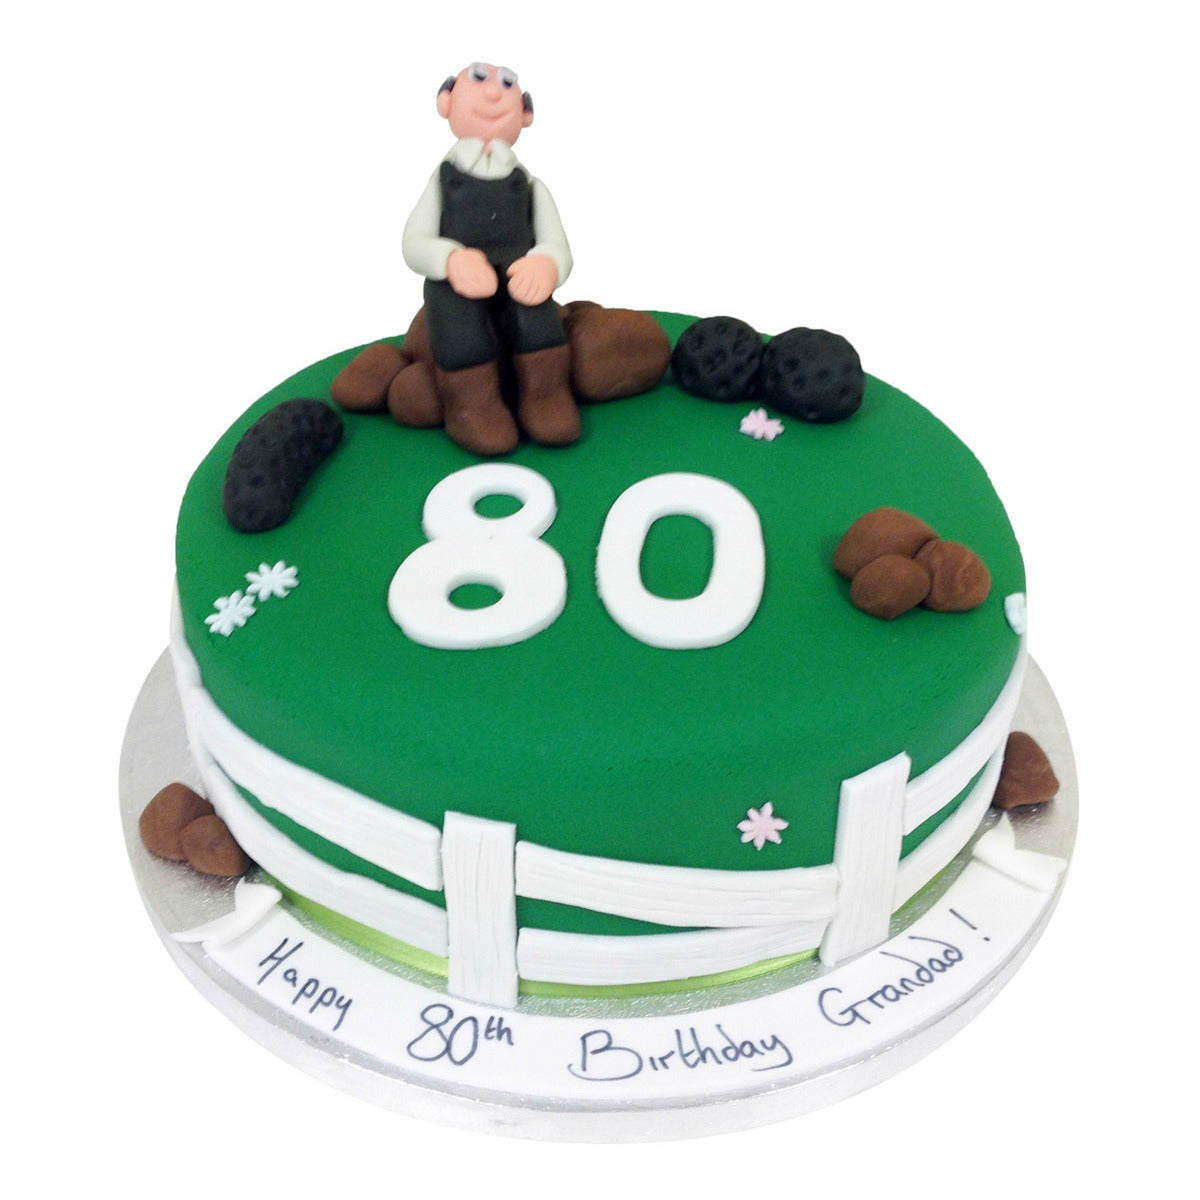  80th  Birthday  Cake  Buy Online Free UK Delivery New Cakes 